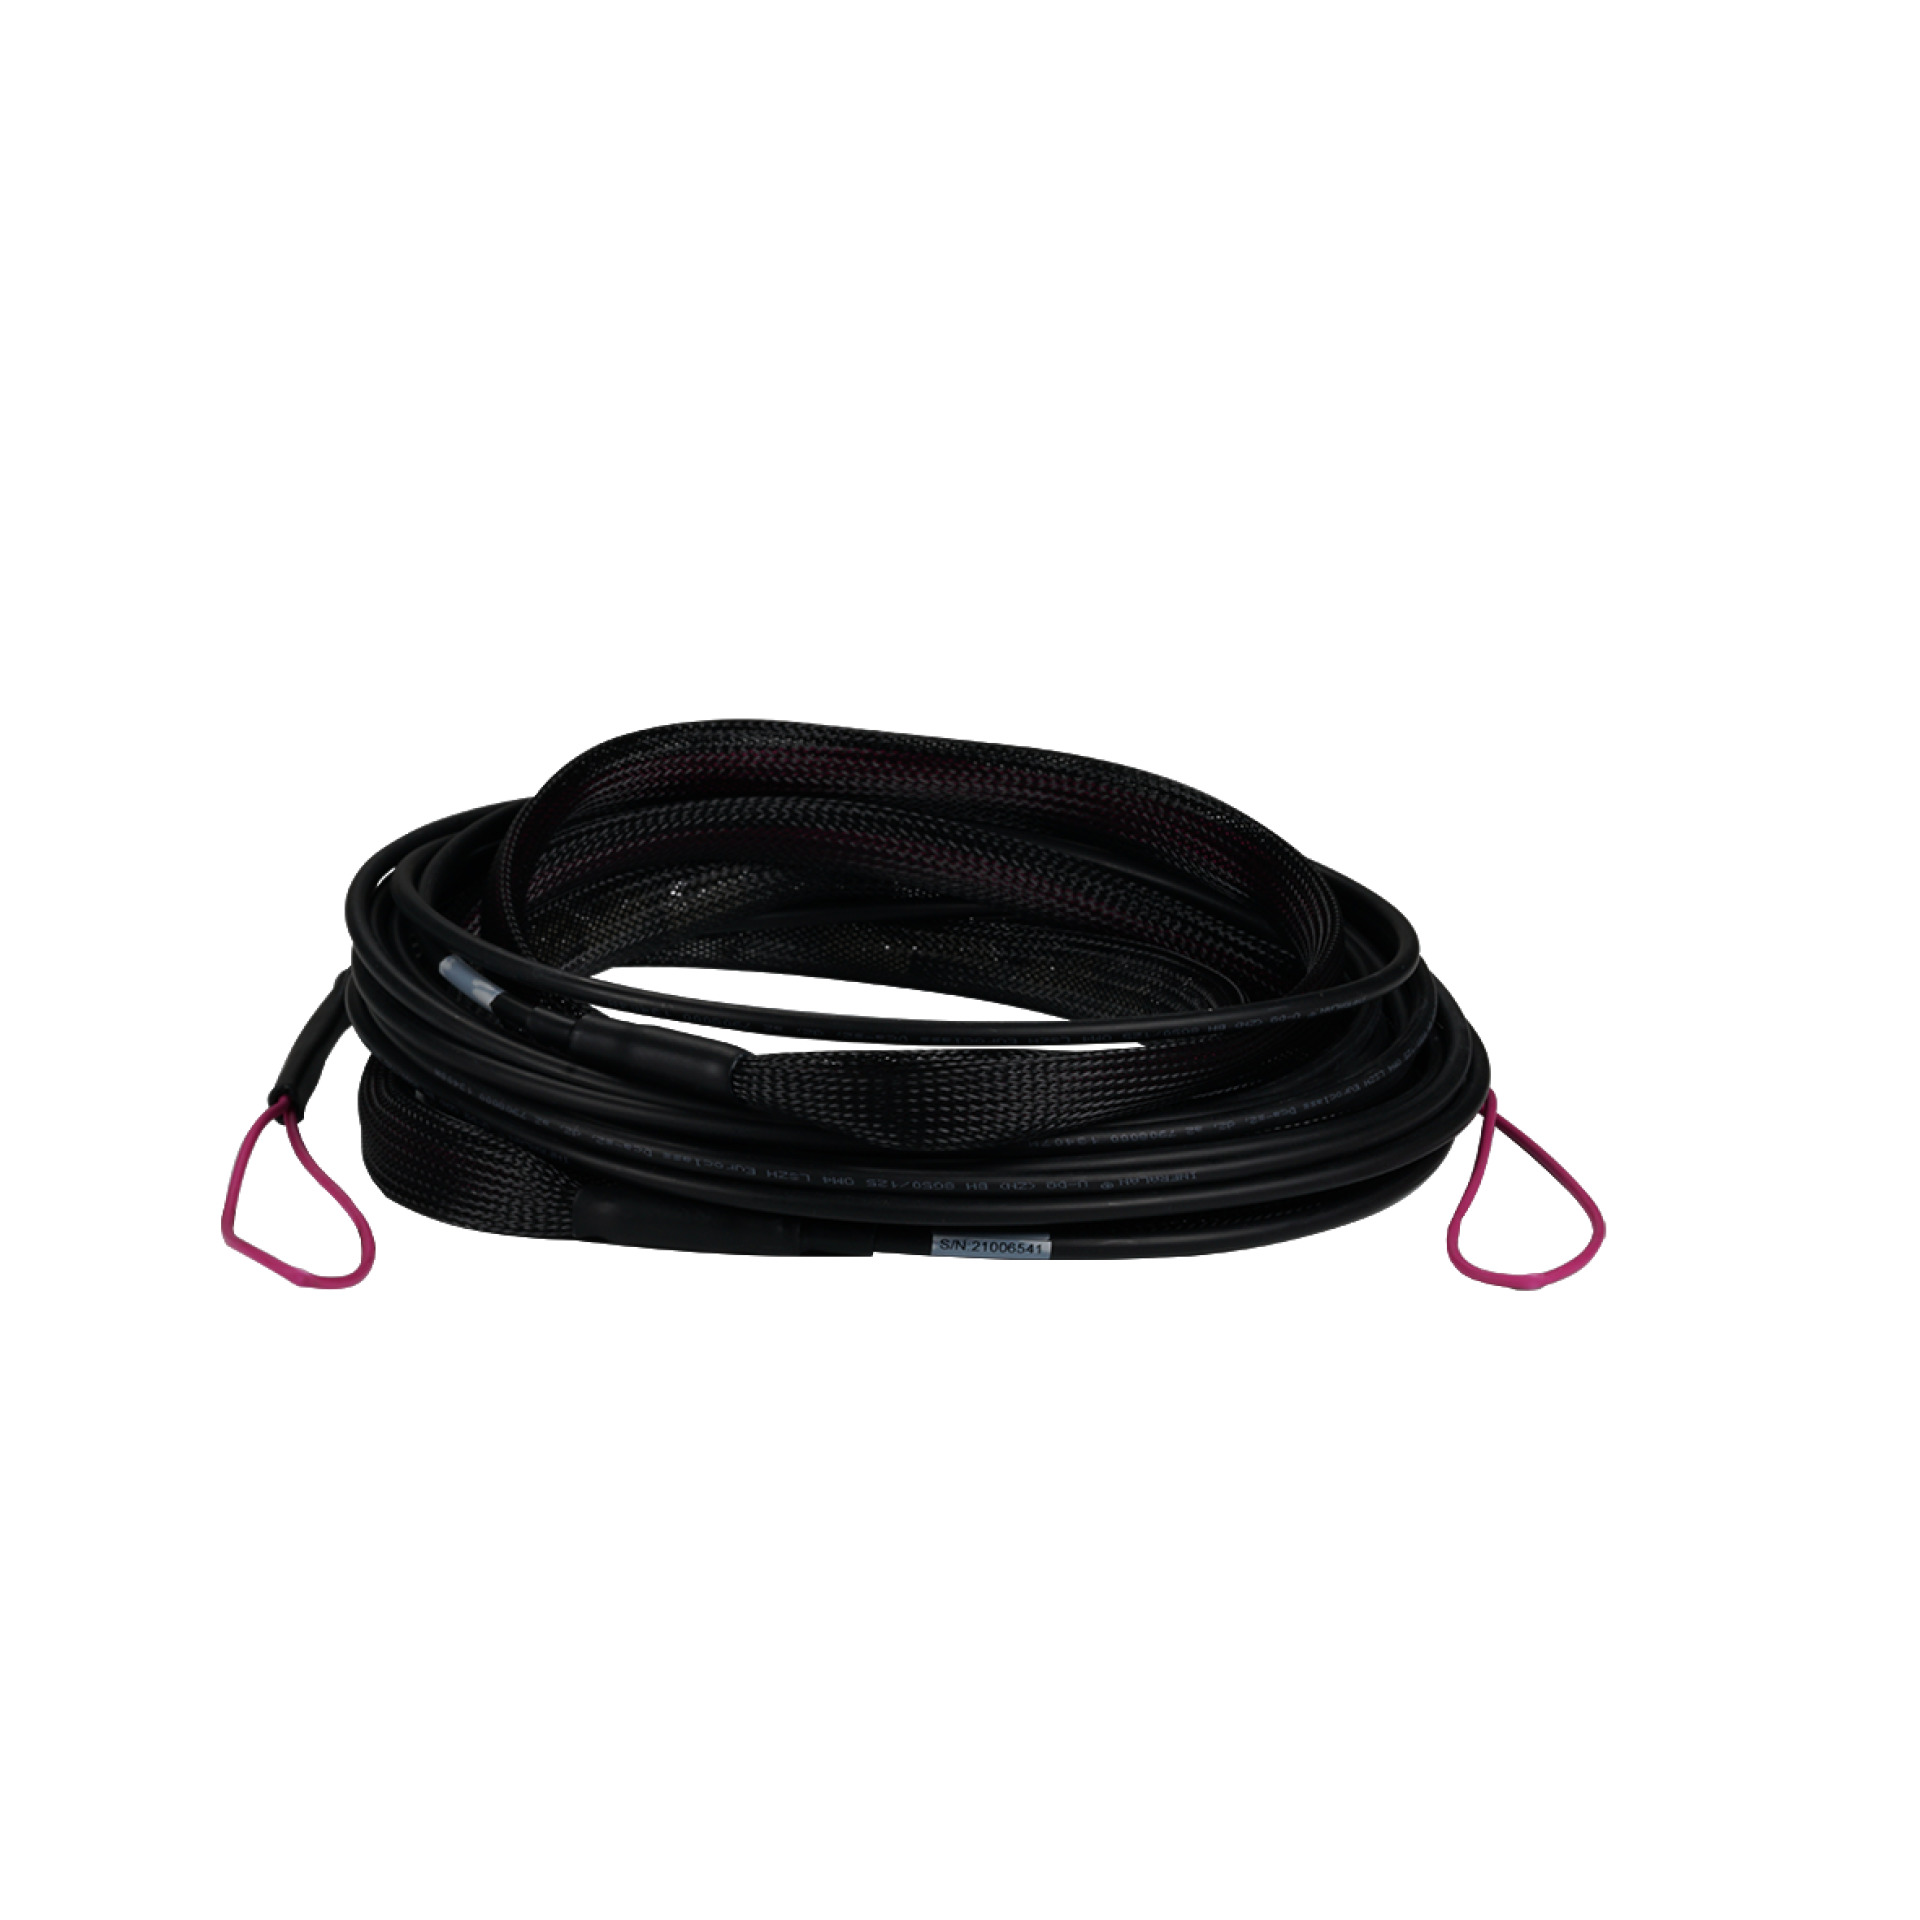 Trunk cable U-DQ(ZN)BH 4G 50/125, SC/SC OM4 80m